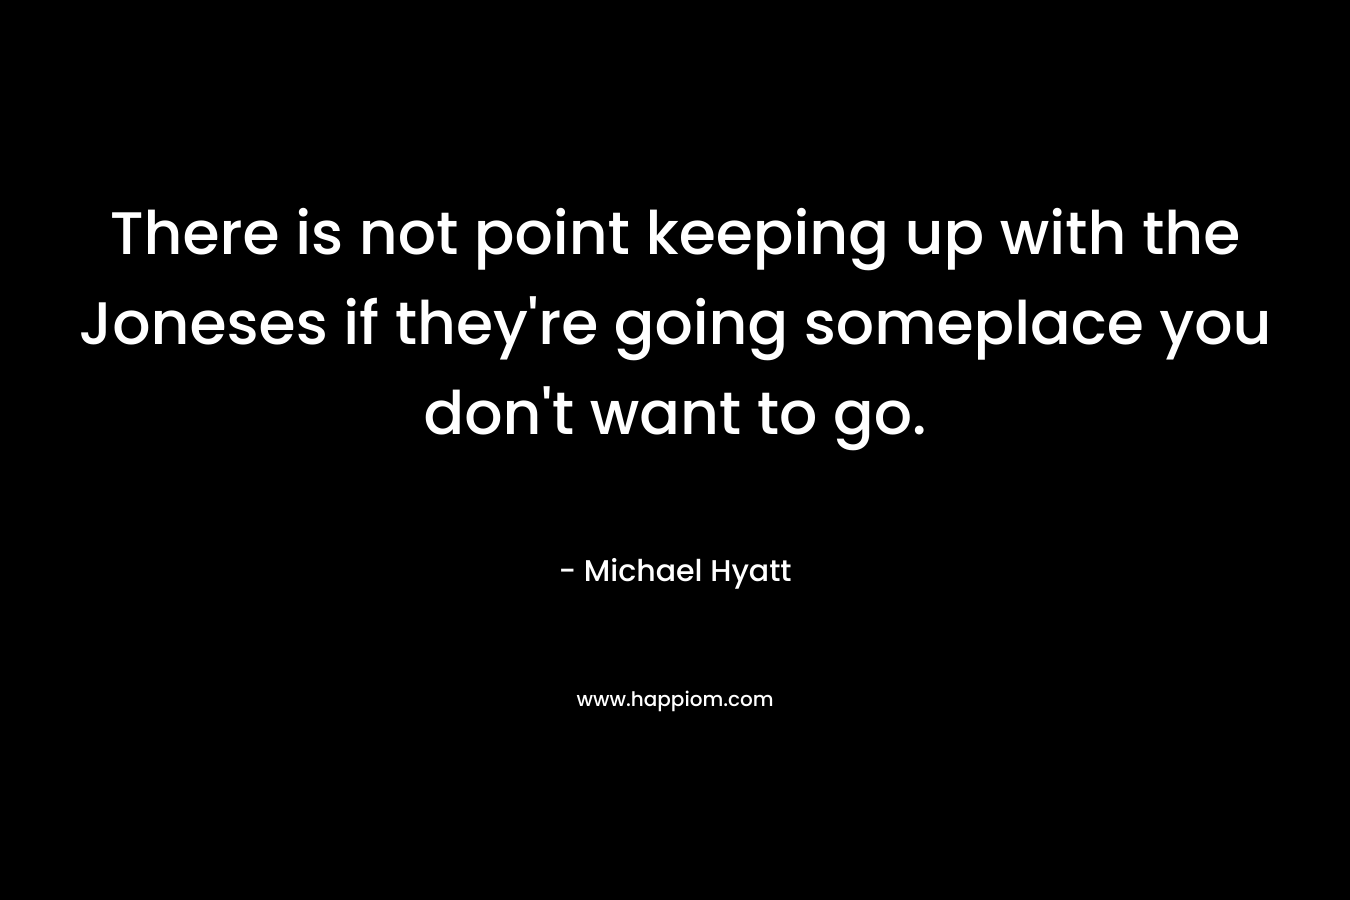 There is not point keeping up with the Joneses if they’re going someplace you don’t want to go. – Michael Hyatt